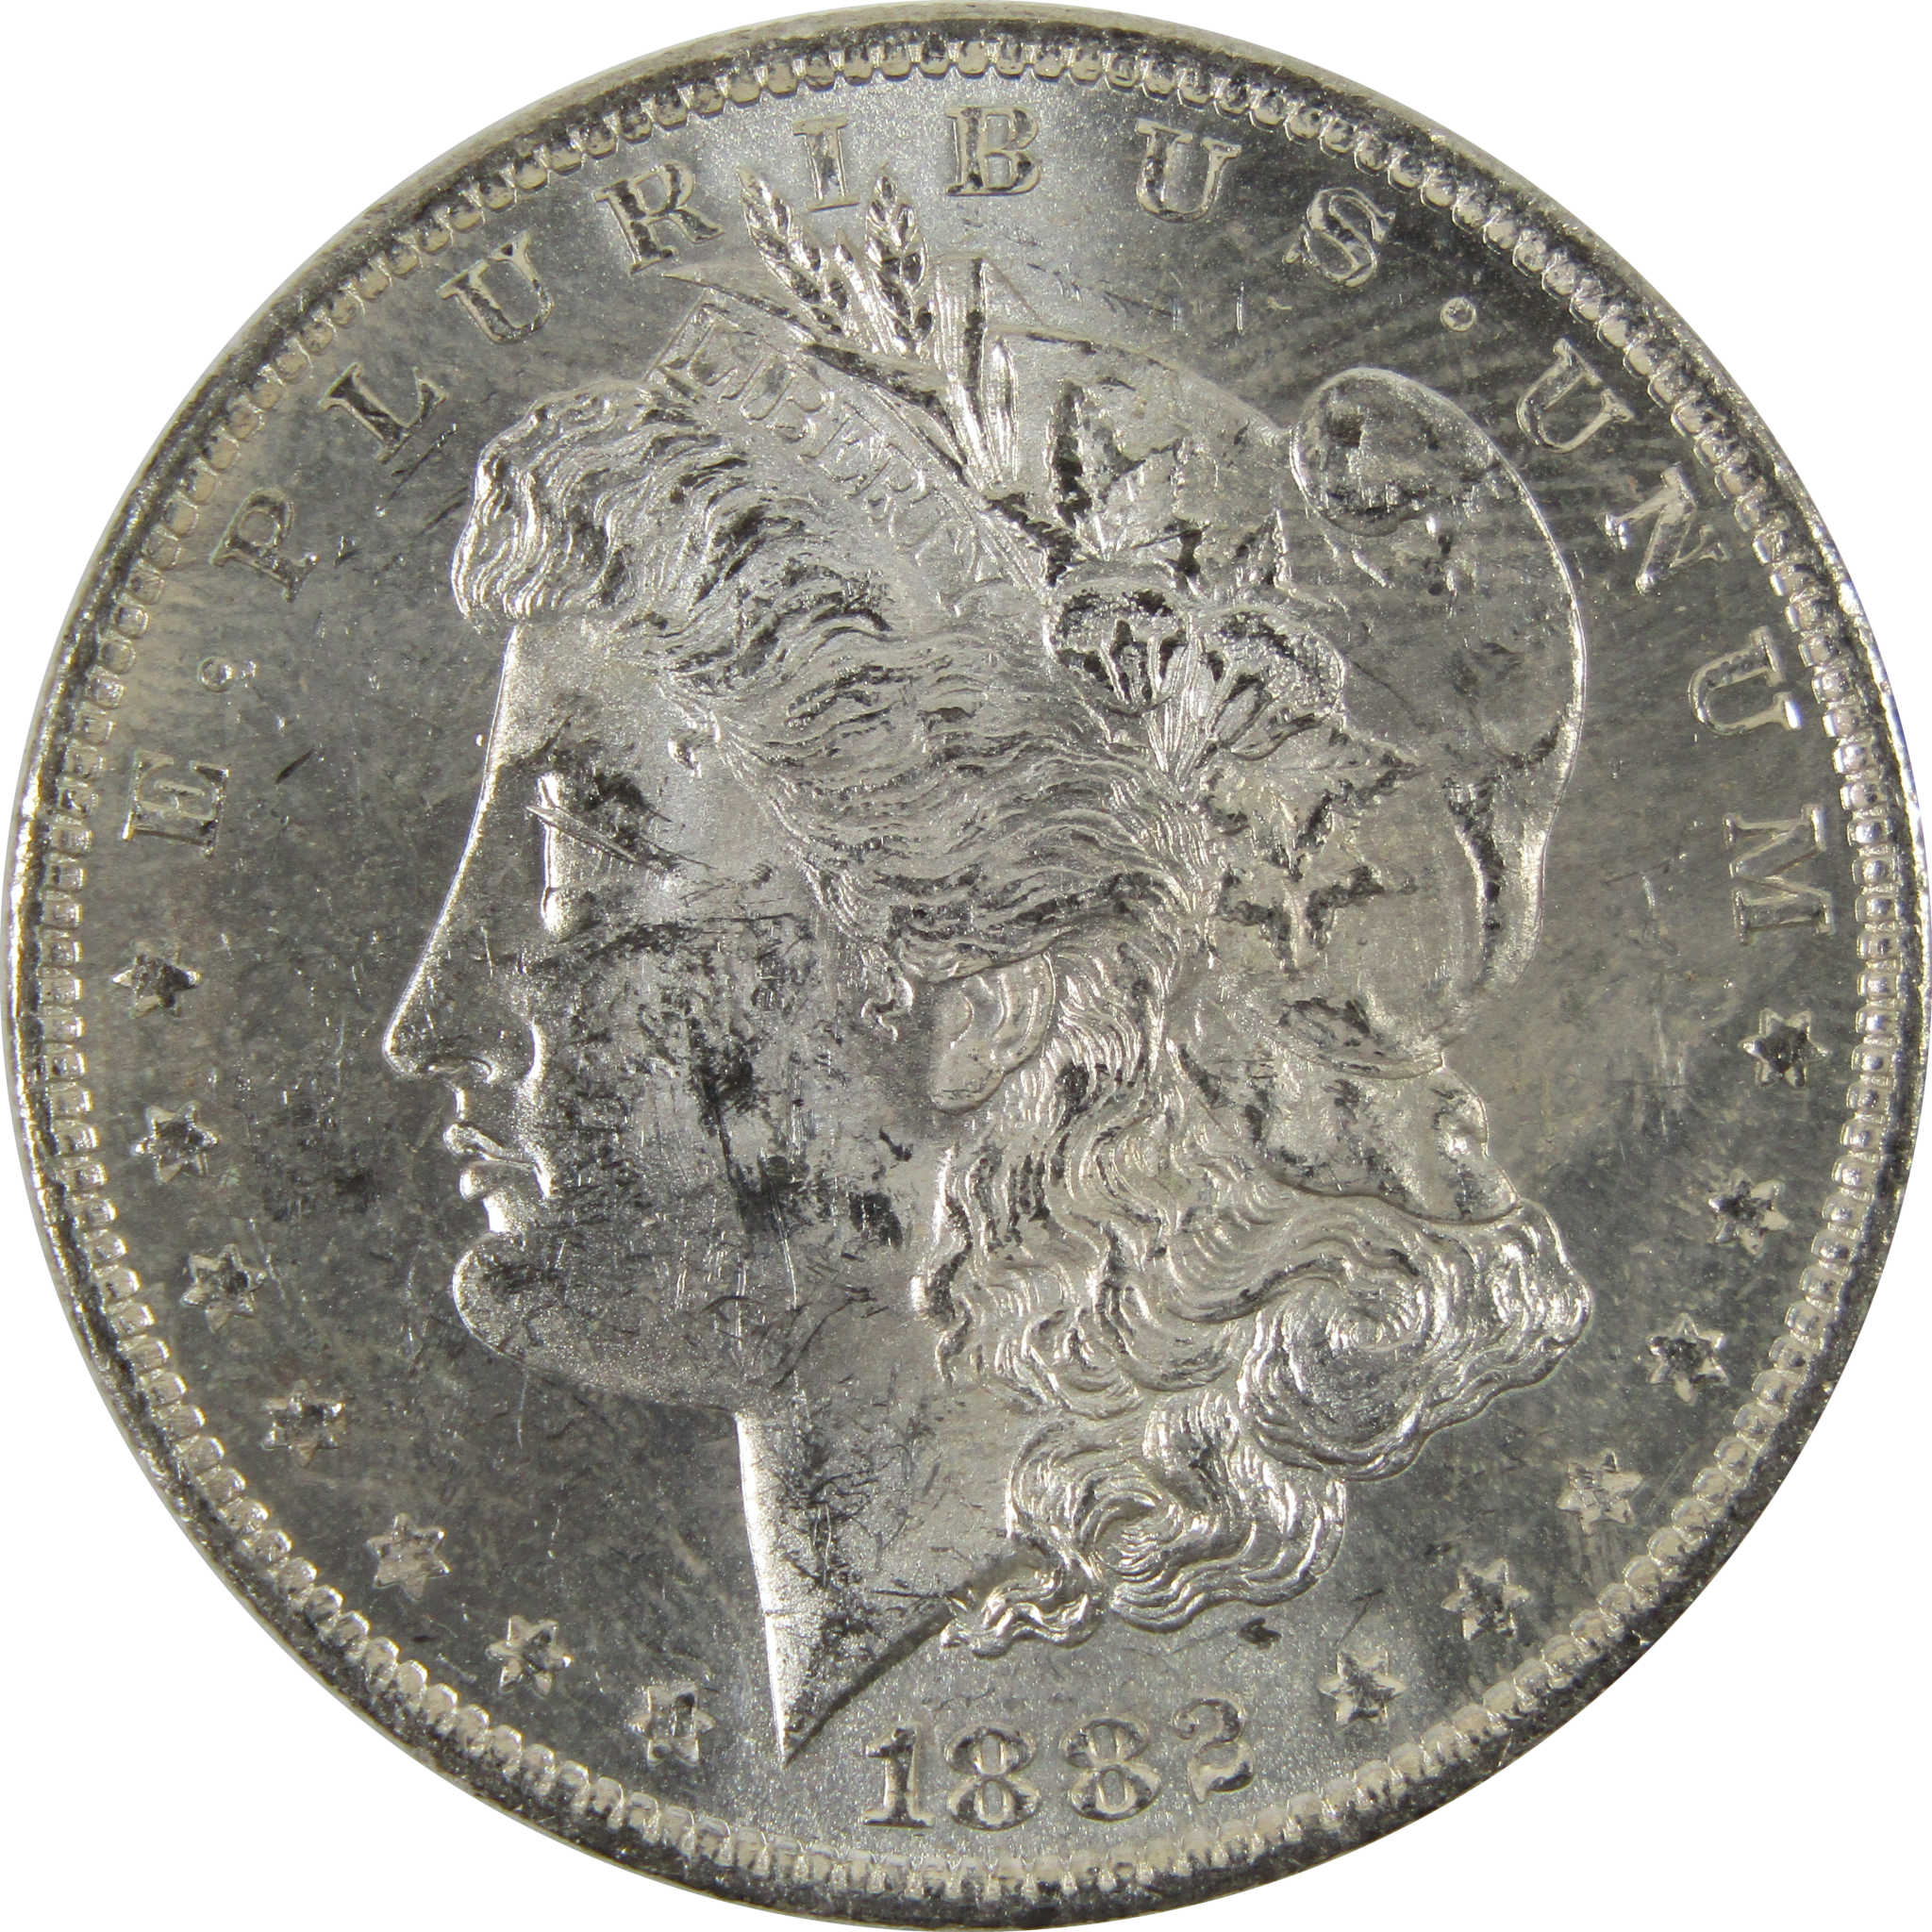 1882 O/O Morgan Dollar AU About Uncirculated 90% Silver $1 SKU:I8889 - Morgan coin - Morgan silver dollar - Morgan silver dollar for sale - Profile Coins &amp; Collectibles